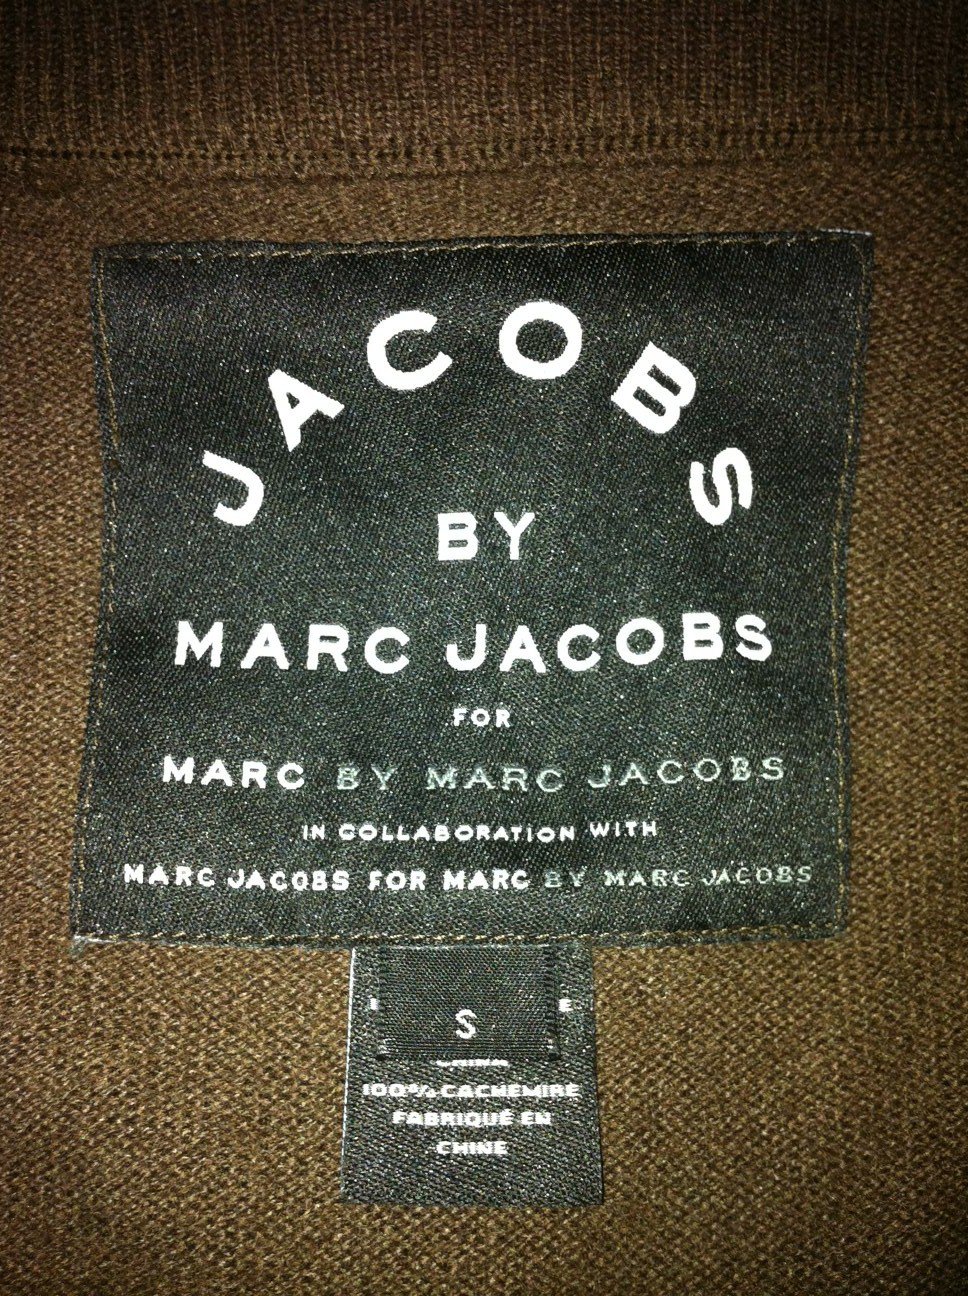 Jacobs by Marc Jacobs for Marc by Marc Jacobs in collaboration with